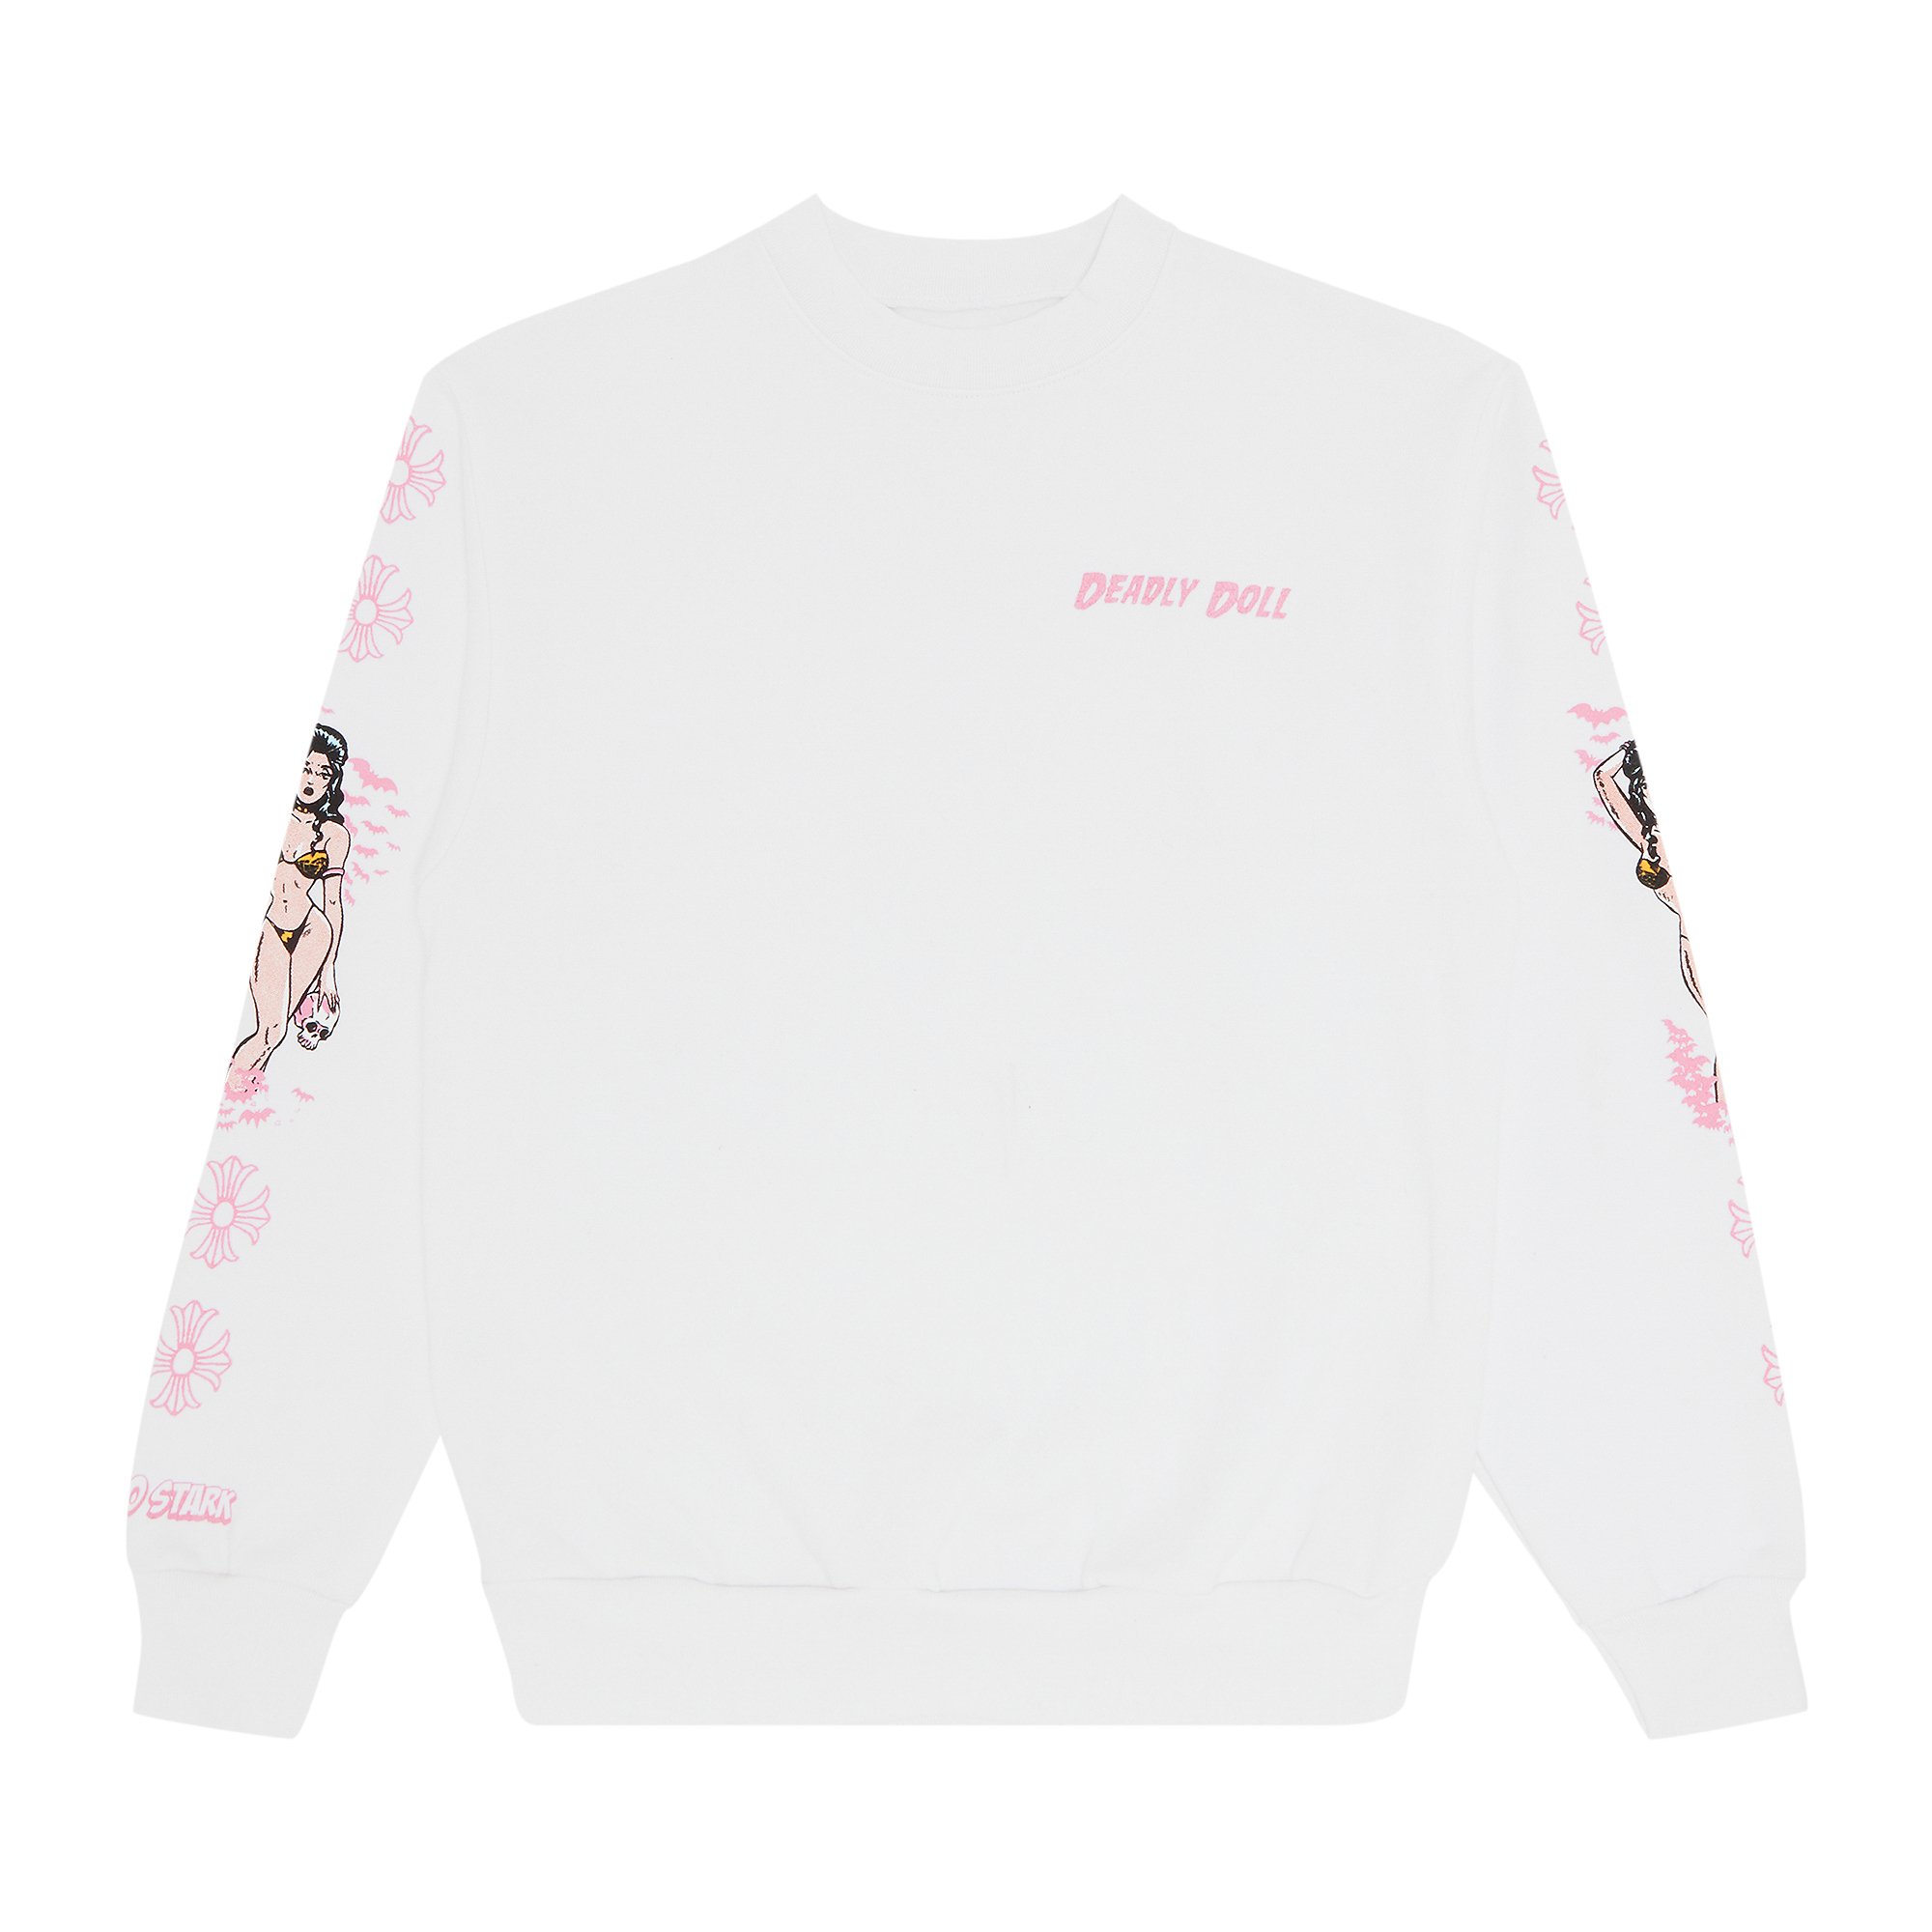 Buy Chrome Hearts x Deadly Doll Crewneck 'White/Pink' - 1383 